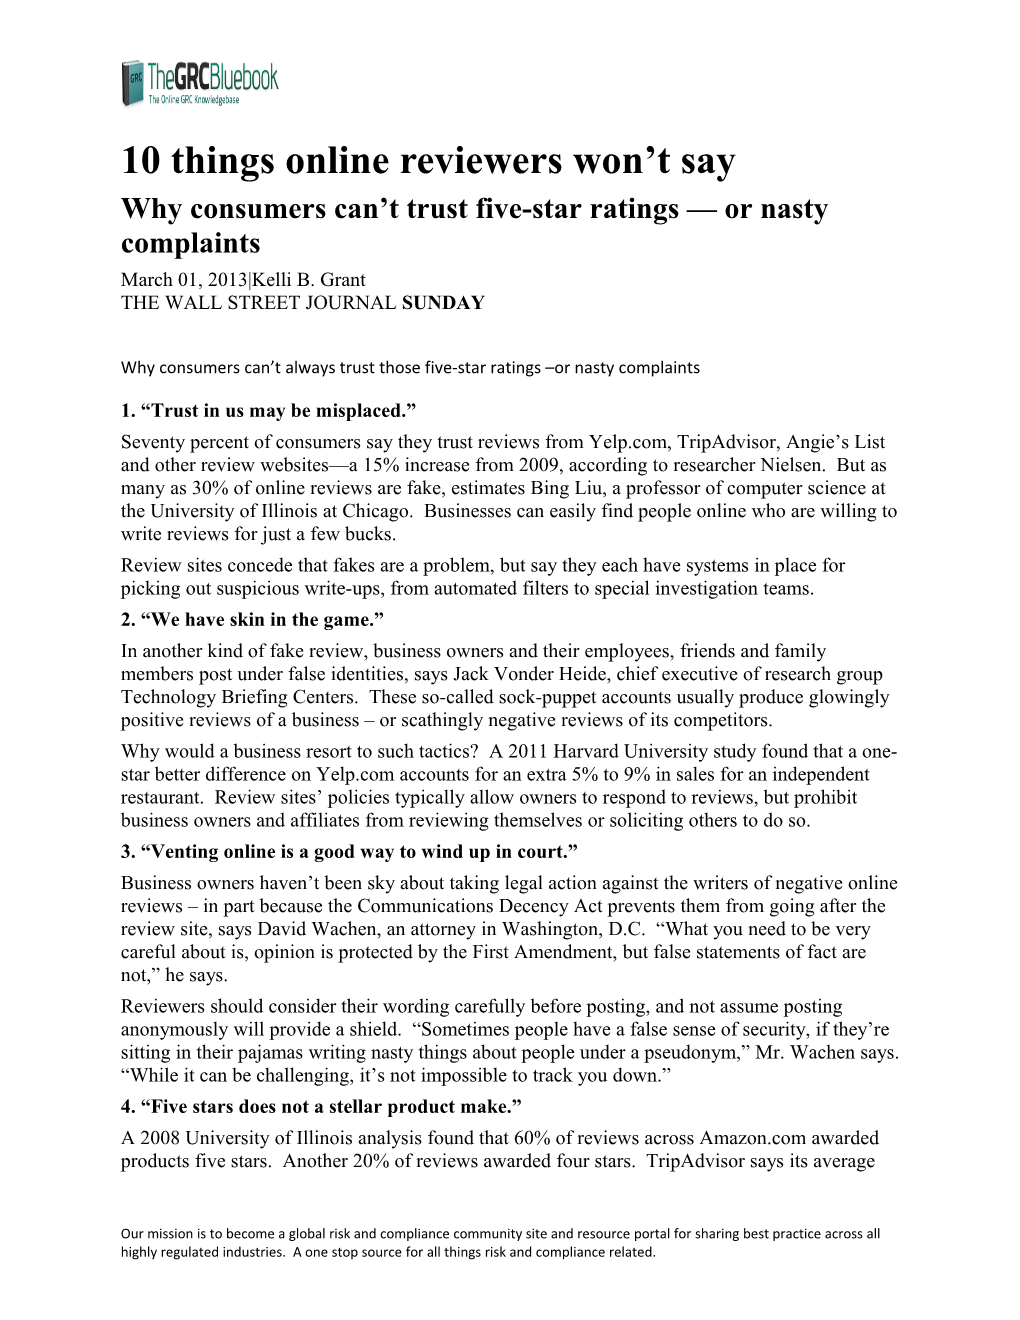 10 Things Online Reviewers Won T Say